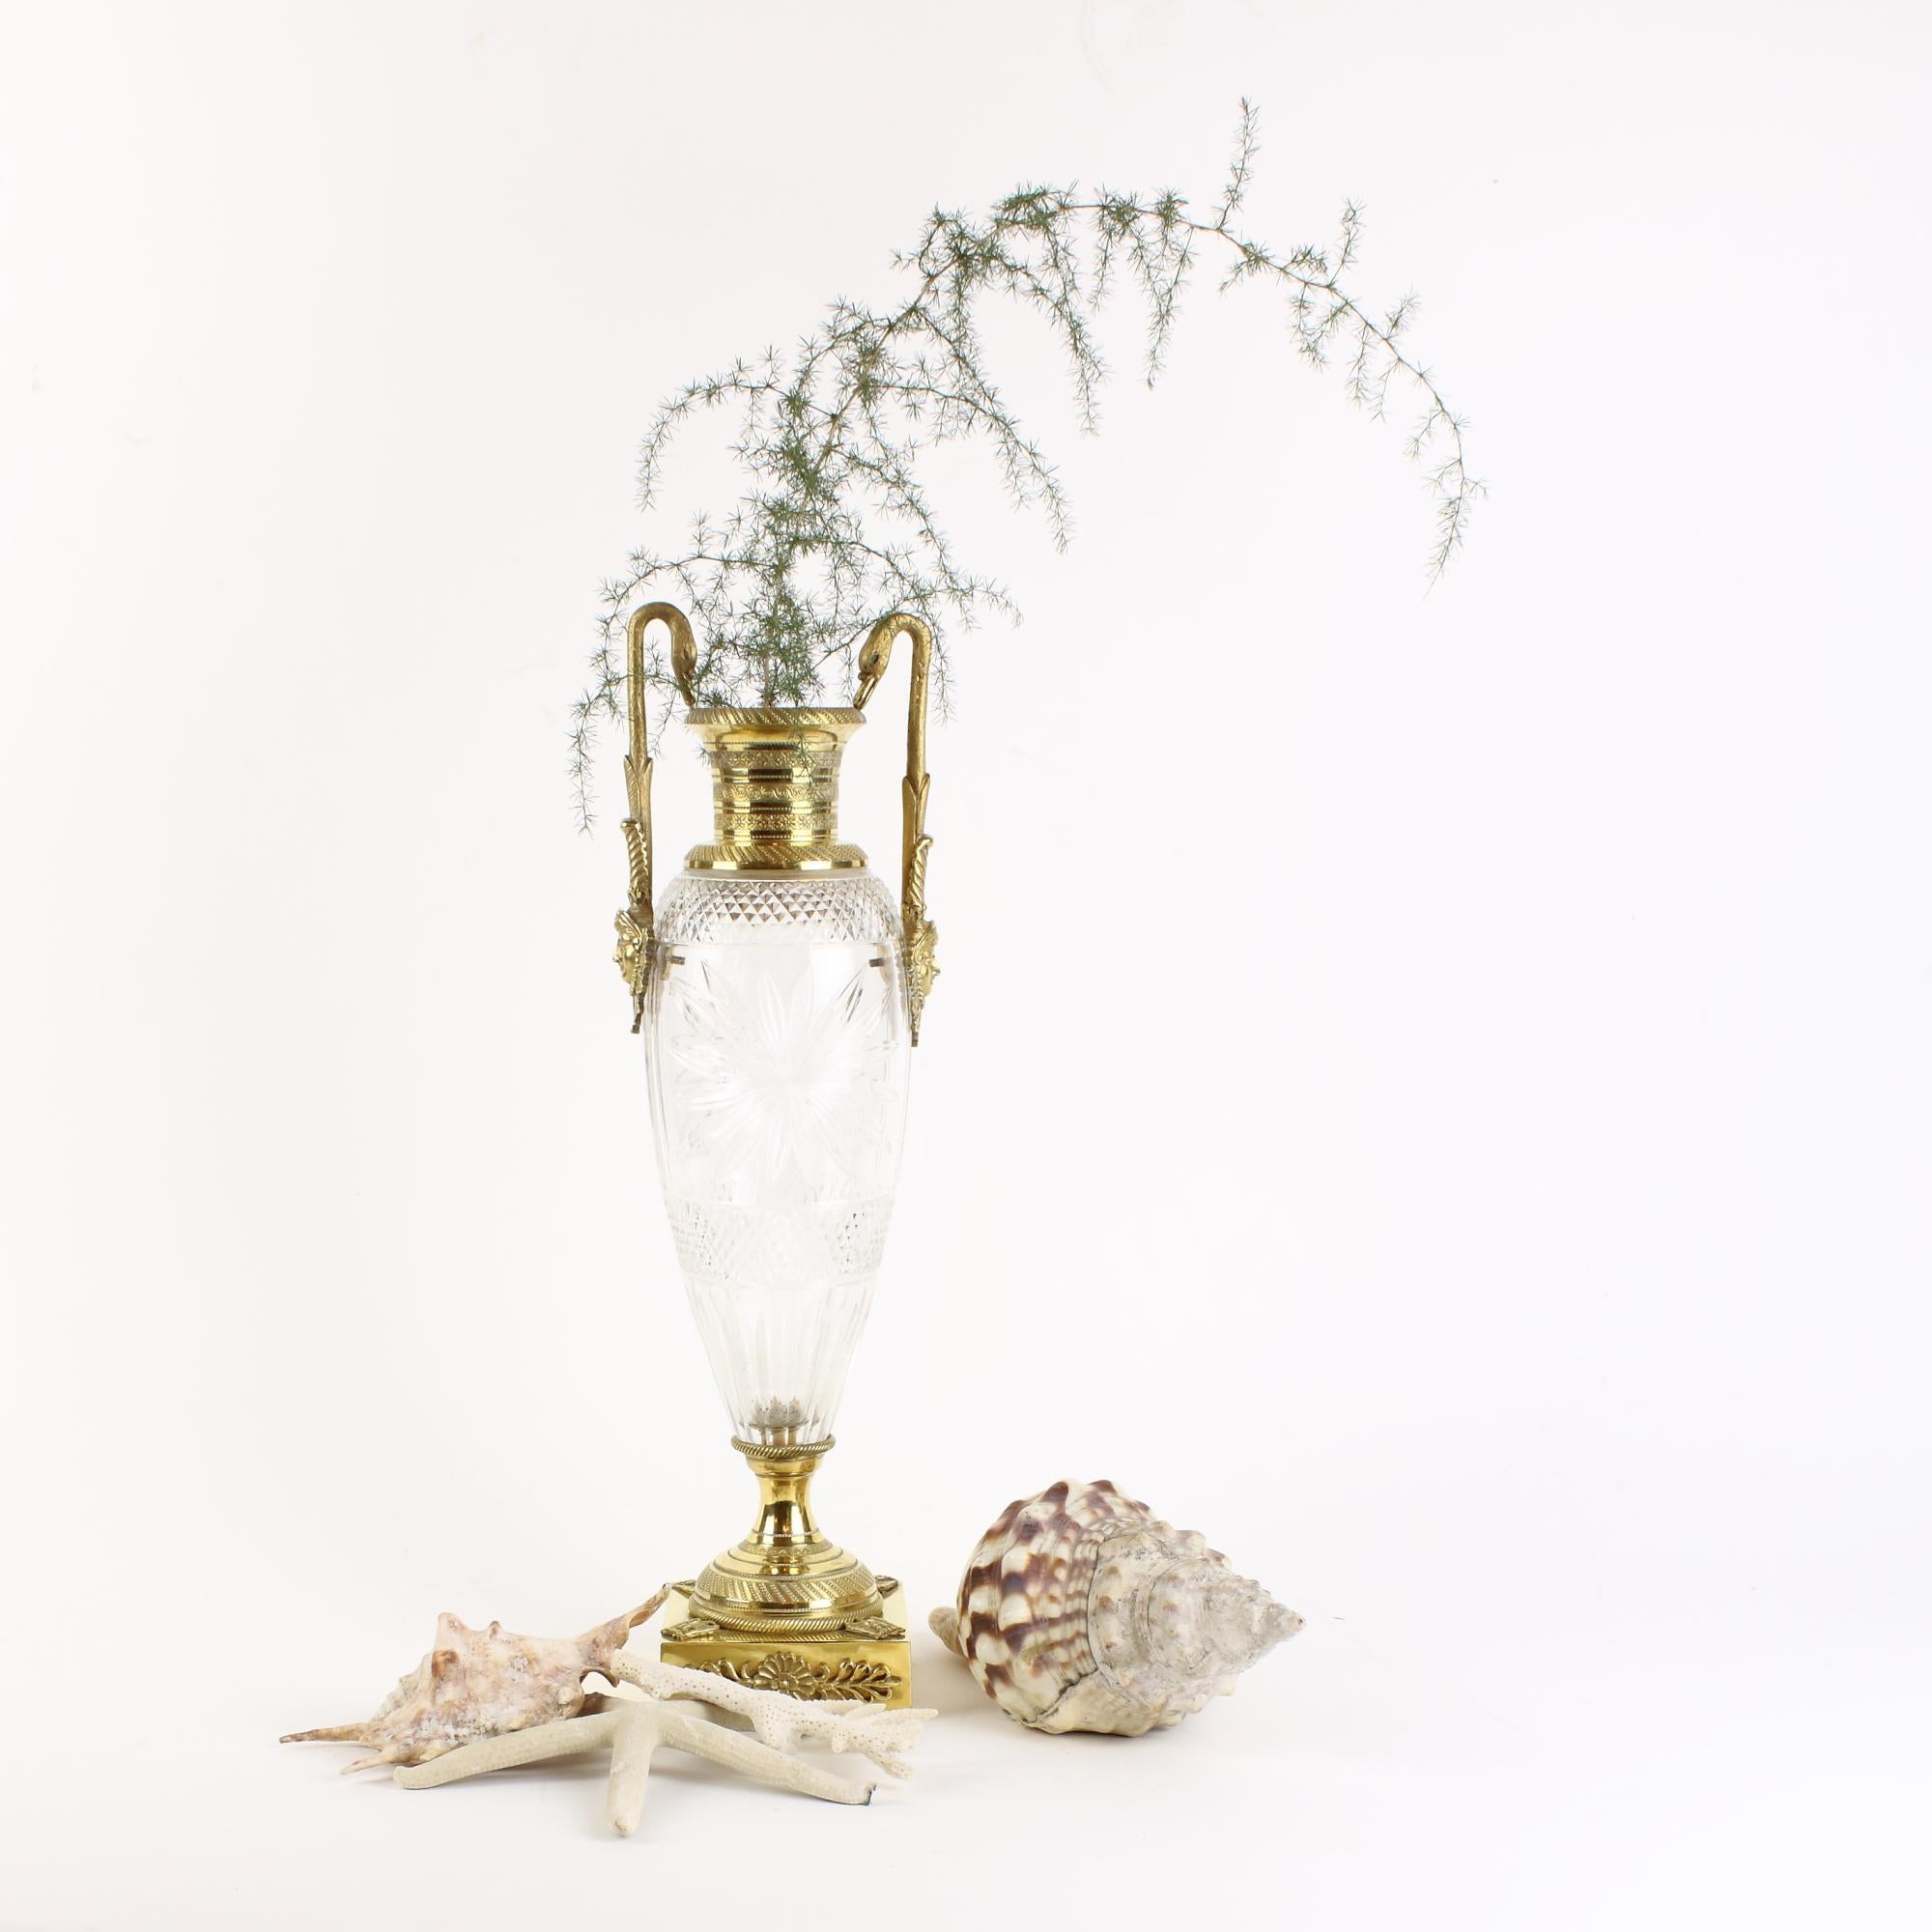 French 19th century empire gilt bronze and cut crystal glass amphora vase

A slender ovoid crystal glass vase standing on a round gilt bronze foot with a rectangular plinth which is decorated at all corners with the French Imperial eagle. Two